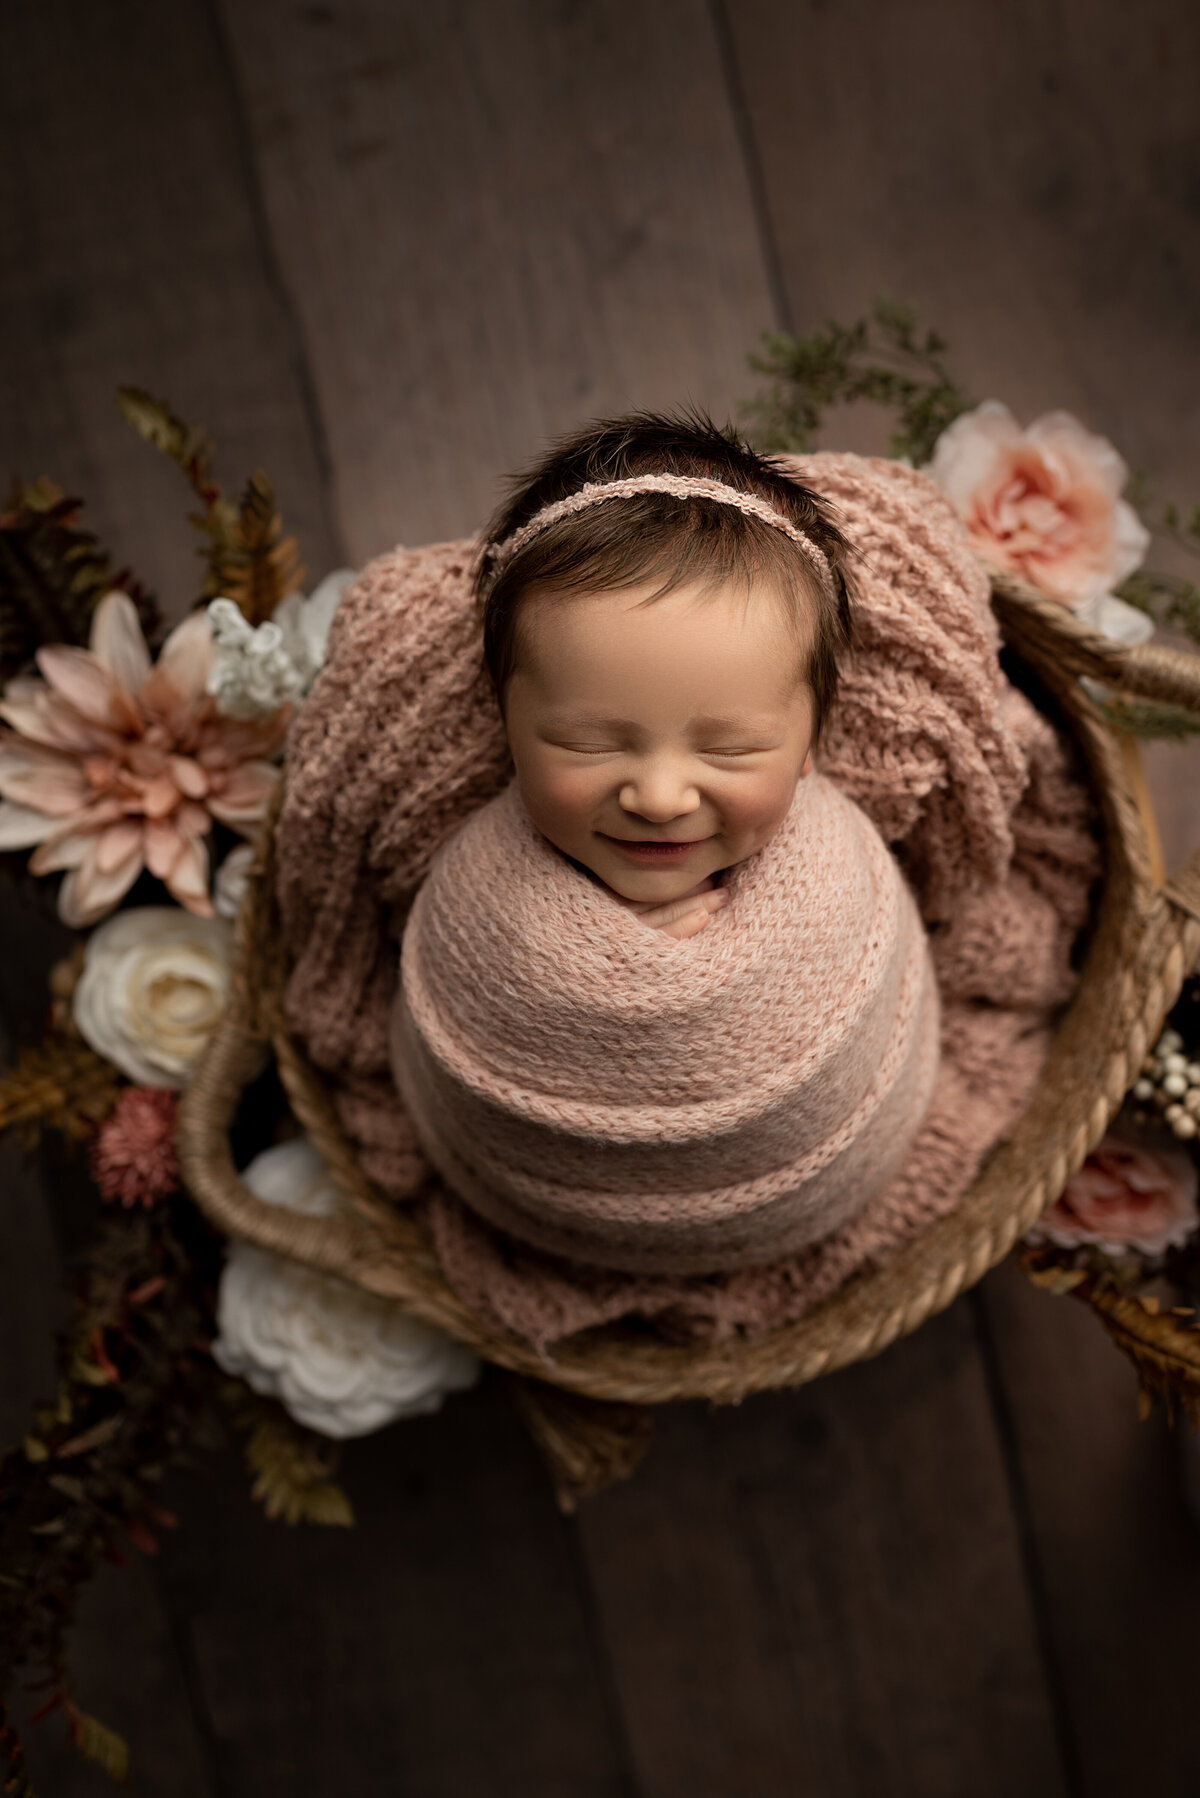 Fine art newborn photos captured by best Philadelphia newborn photographer Katie Marshall. Baby girl is swaddled in a pink light knit blanket and wearing a matching delicate headband. She is placed in a basket and there are coordinating flowers surrounding her.